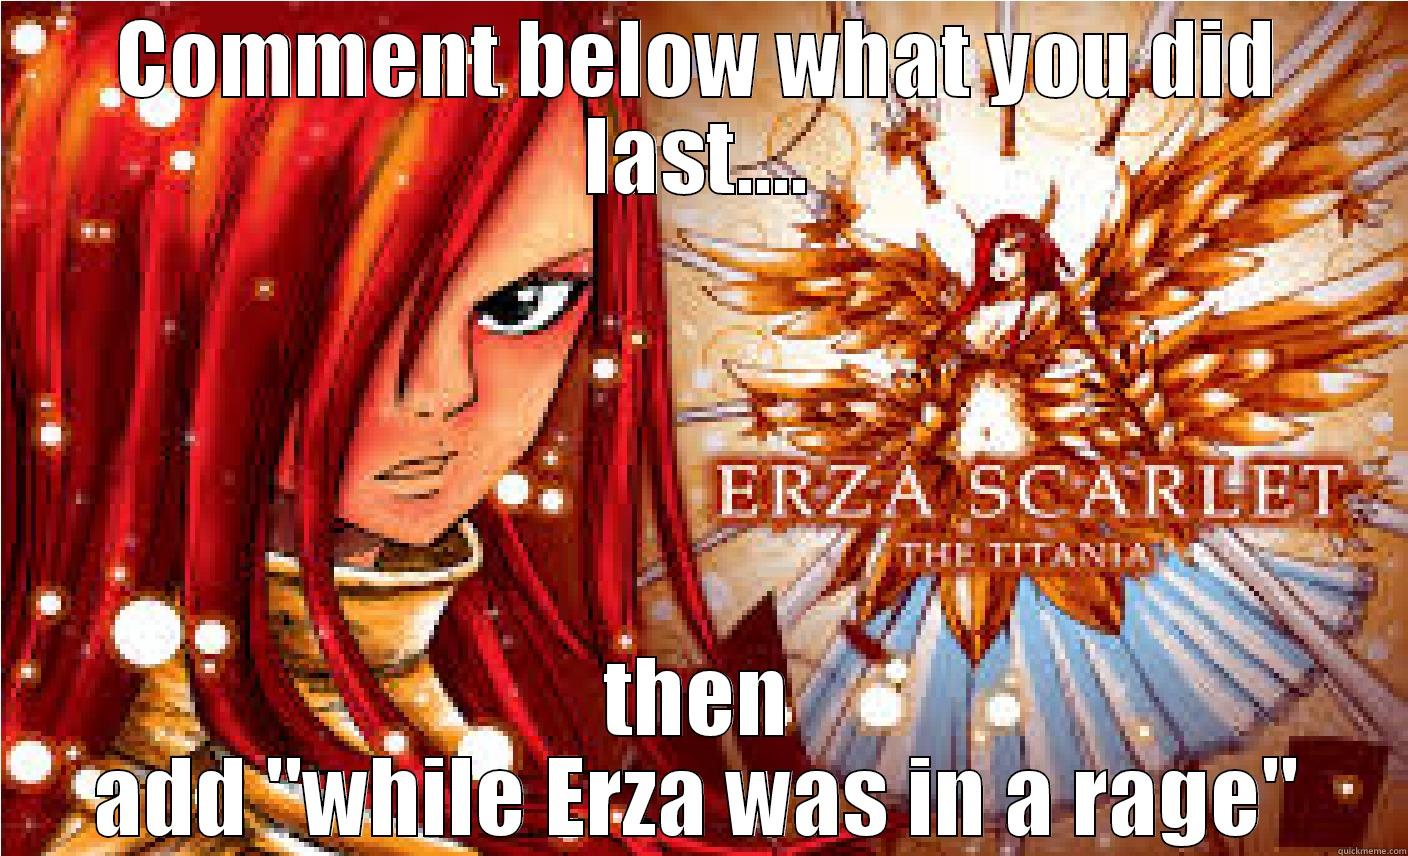 Erza Scarlet the Titania game - COMMENT BELOW WHAT YOU DID LAST.... THEN ADD 